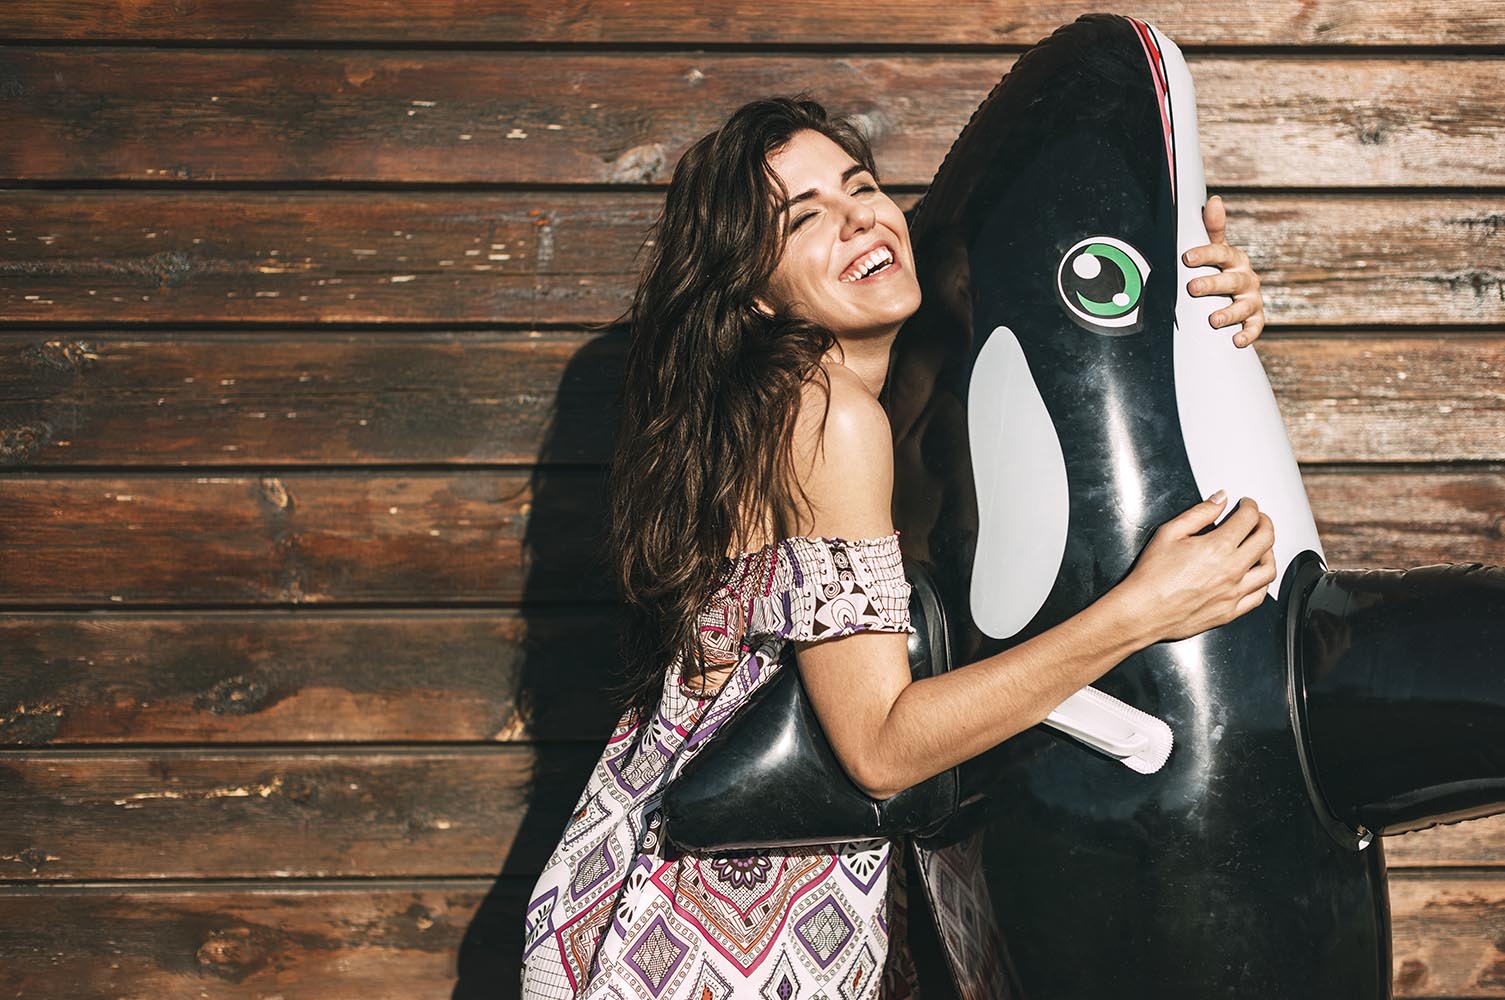 Beautiful young girl hugging an inflatable orca whale